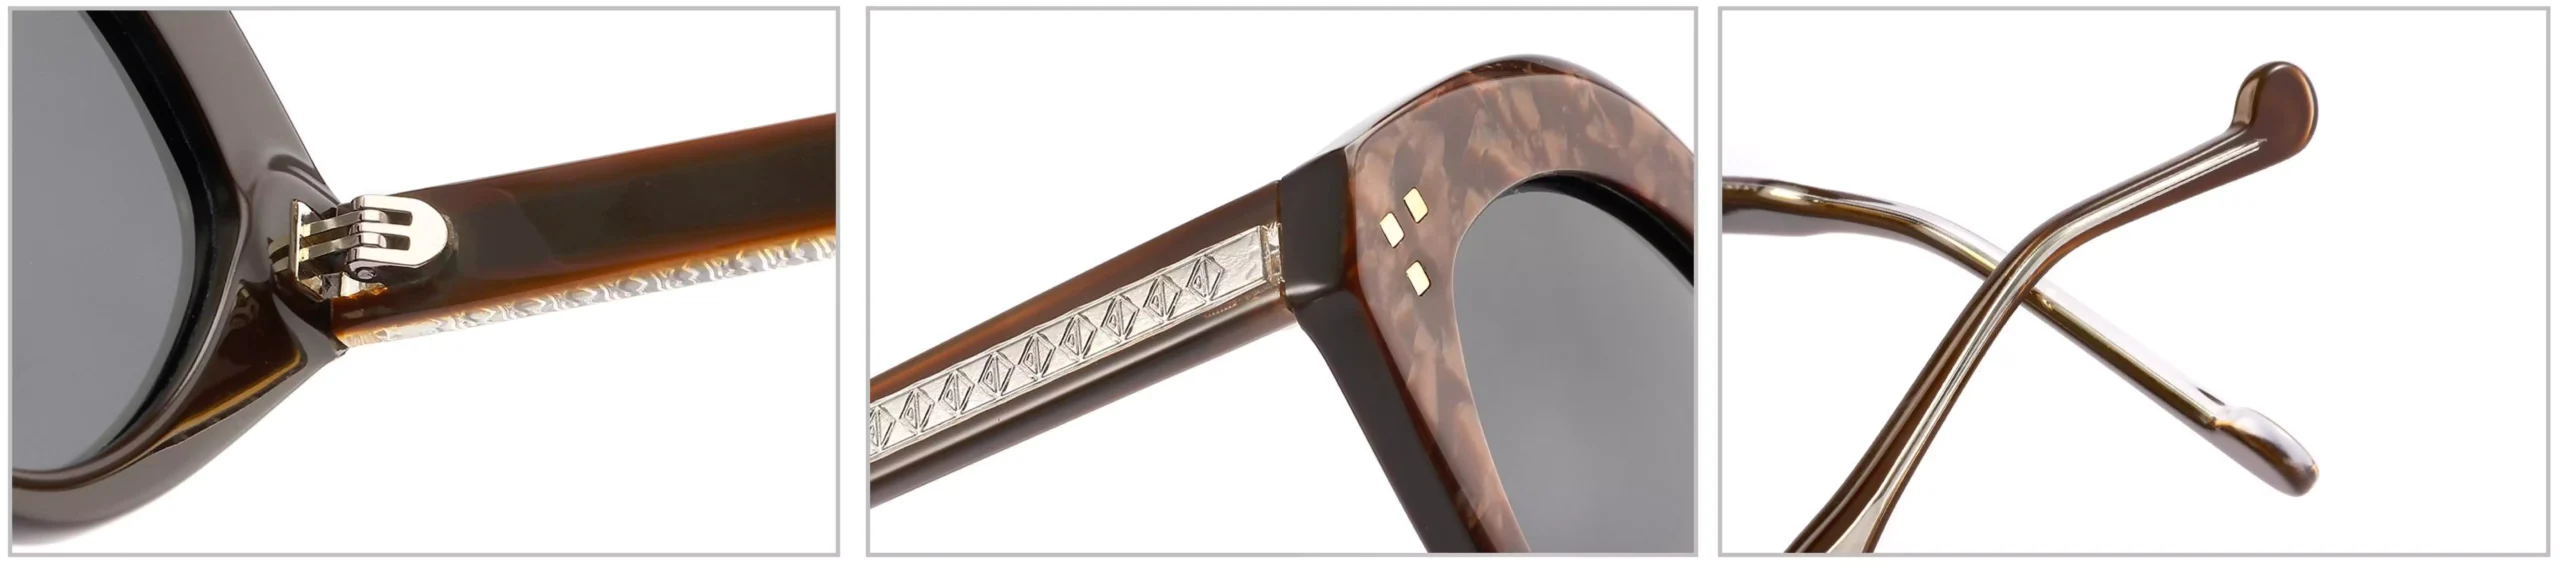 Sunglasses YD1204T Detail Shooting, include temple, temple tips, hinge, endpieces, wire cores, rivets